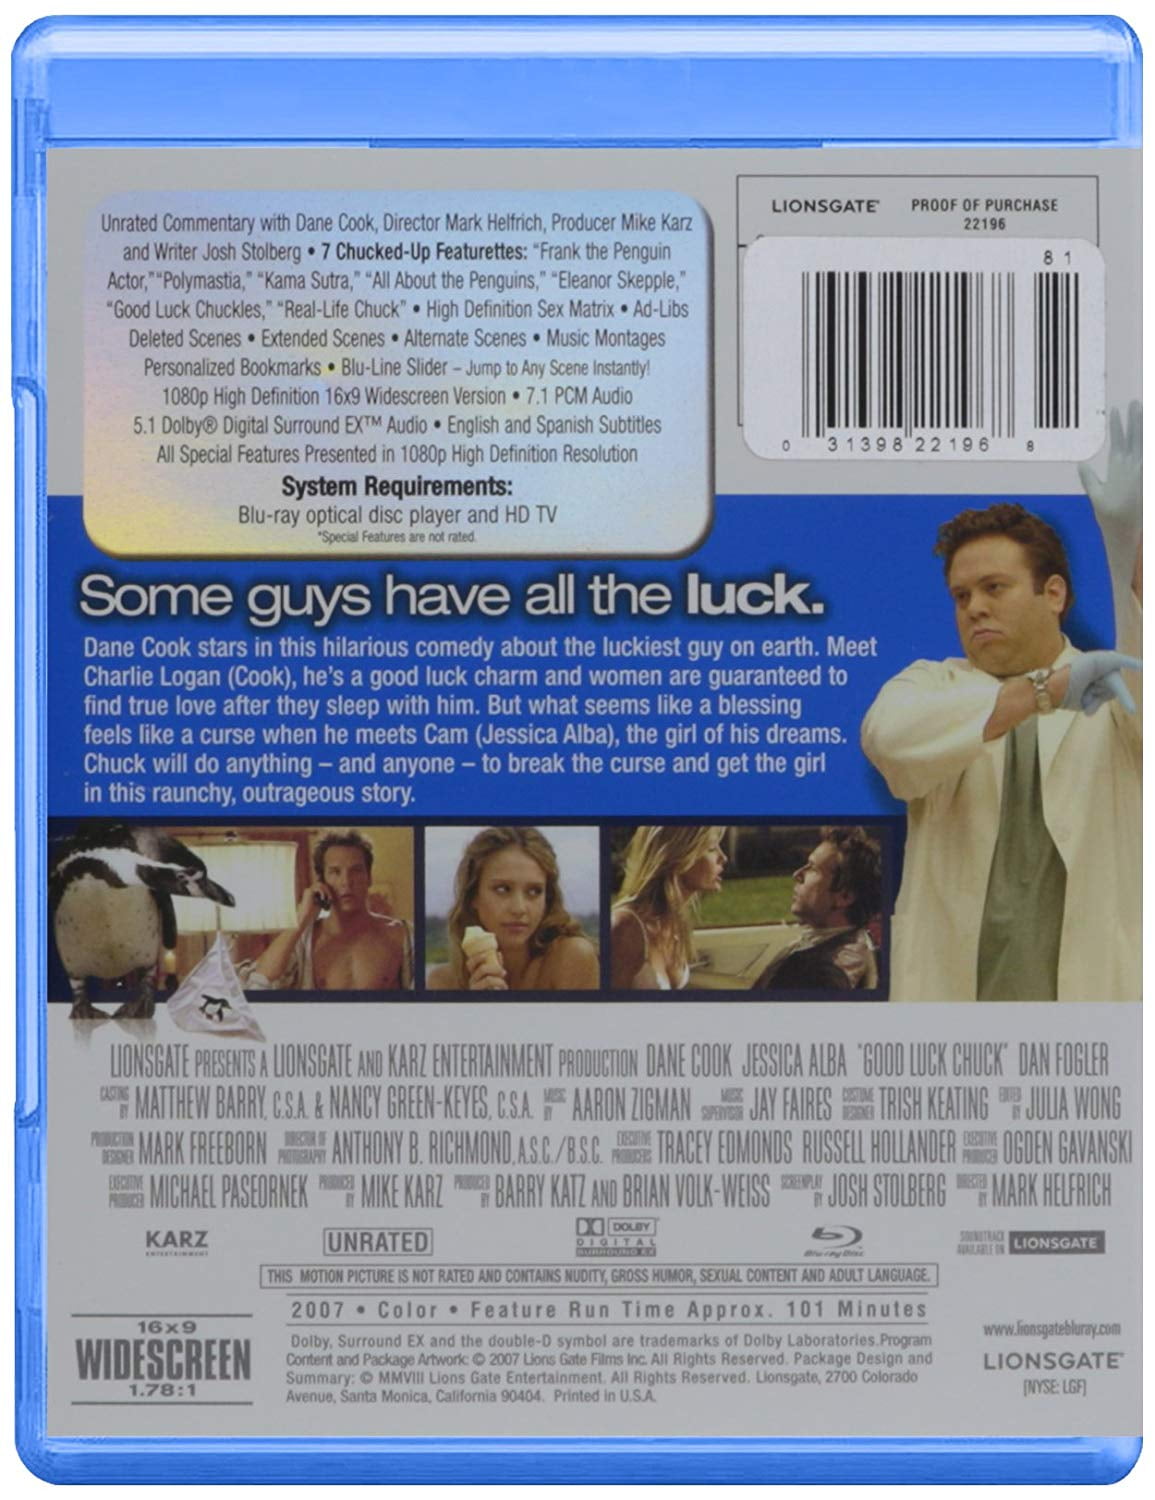 abhinav chhibber recommends good luck chuck unrated pic